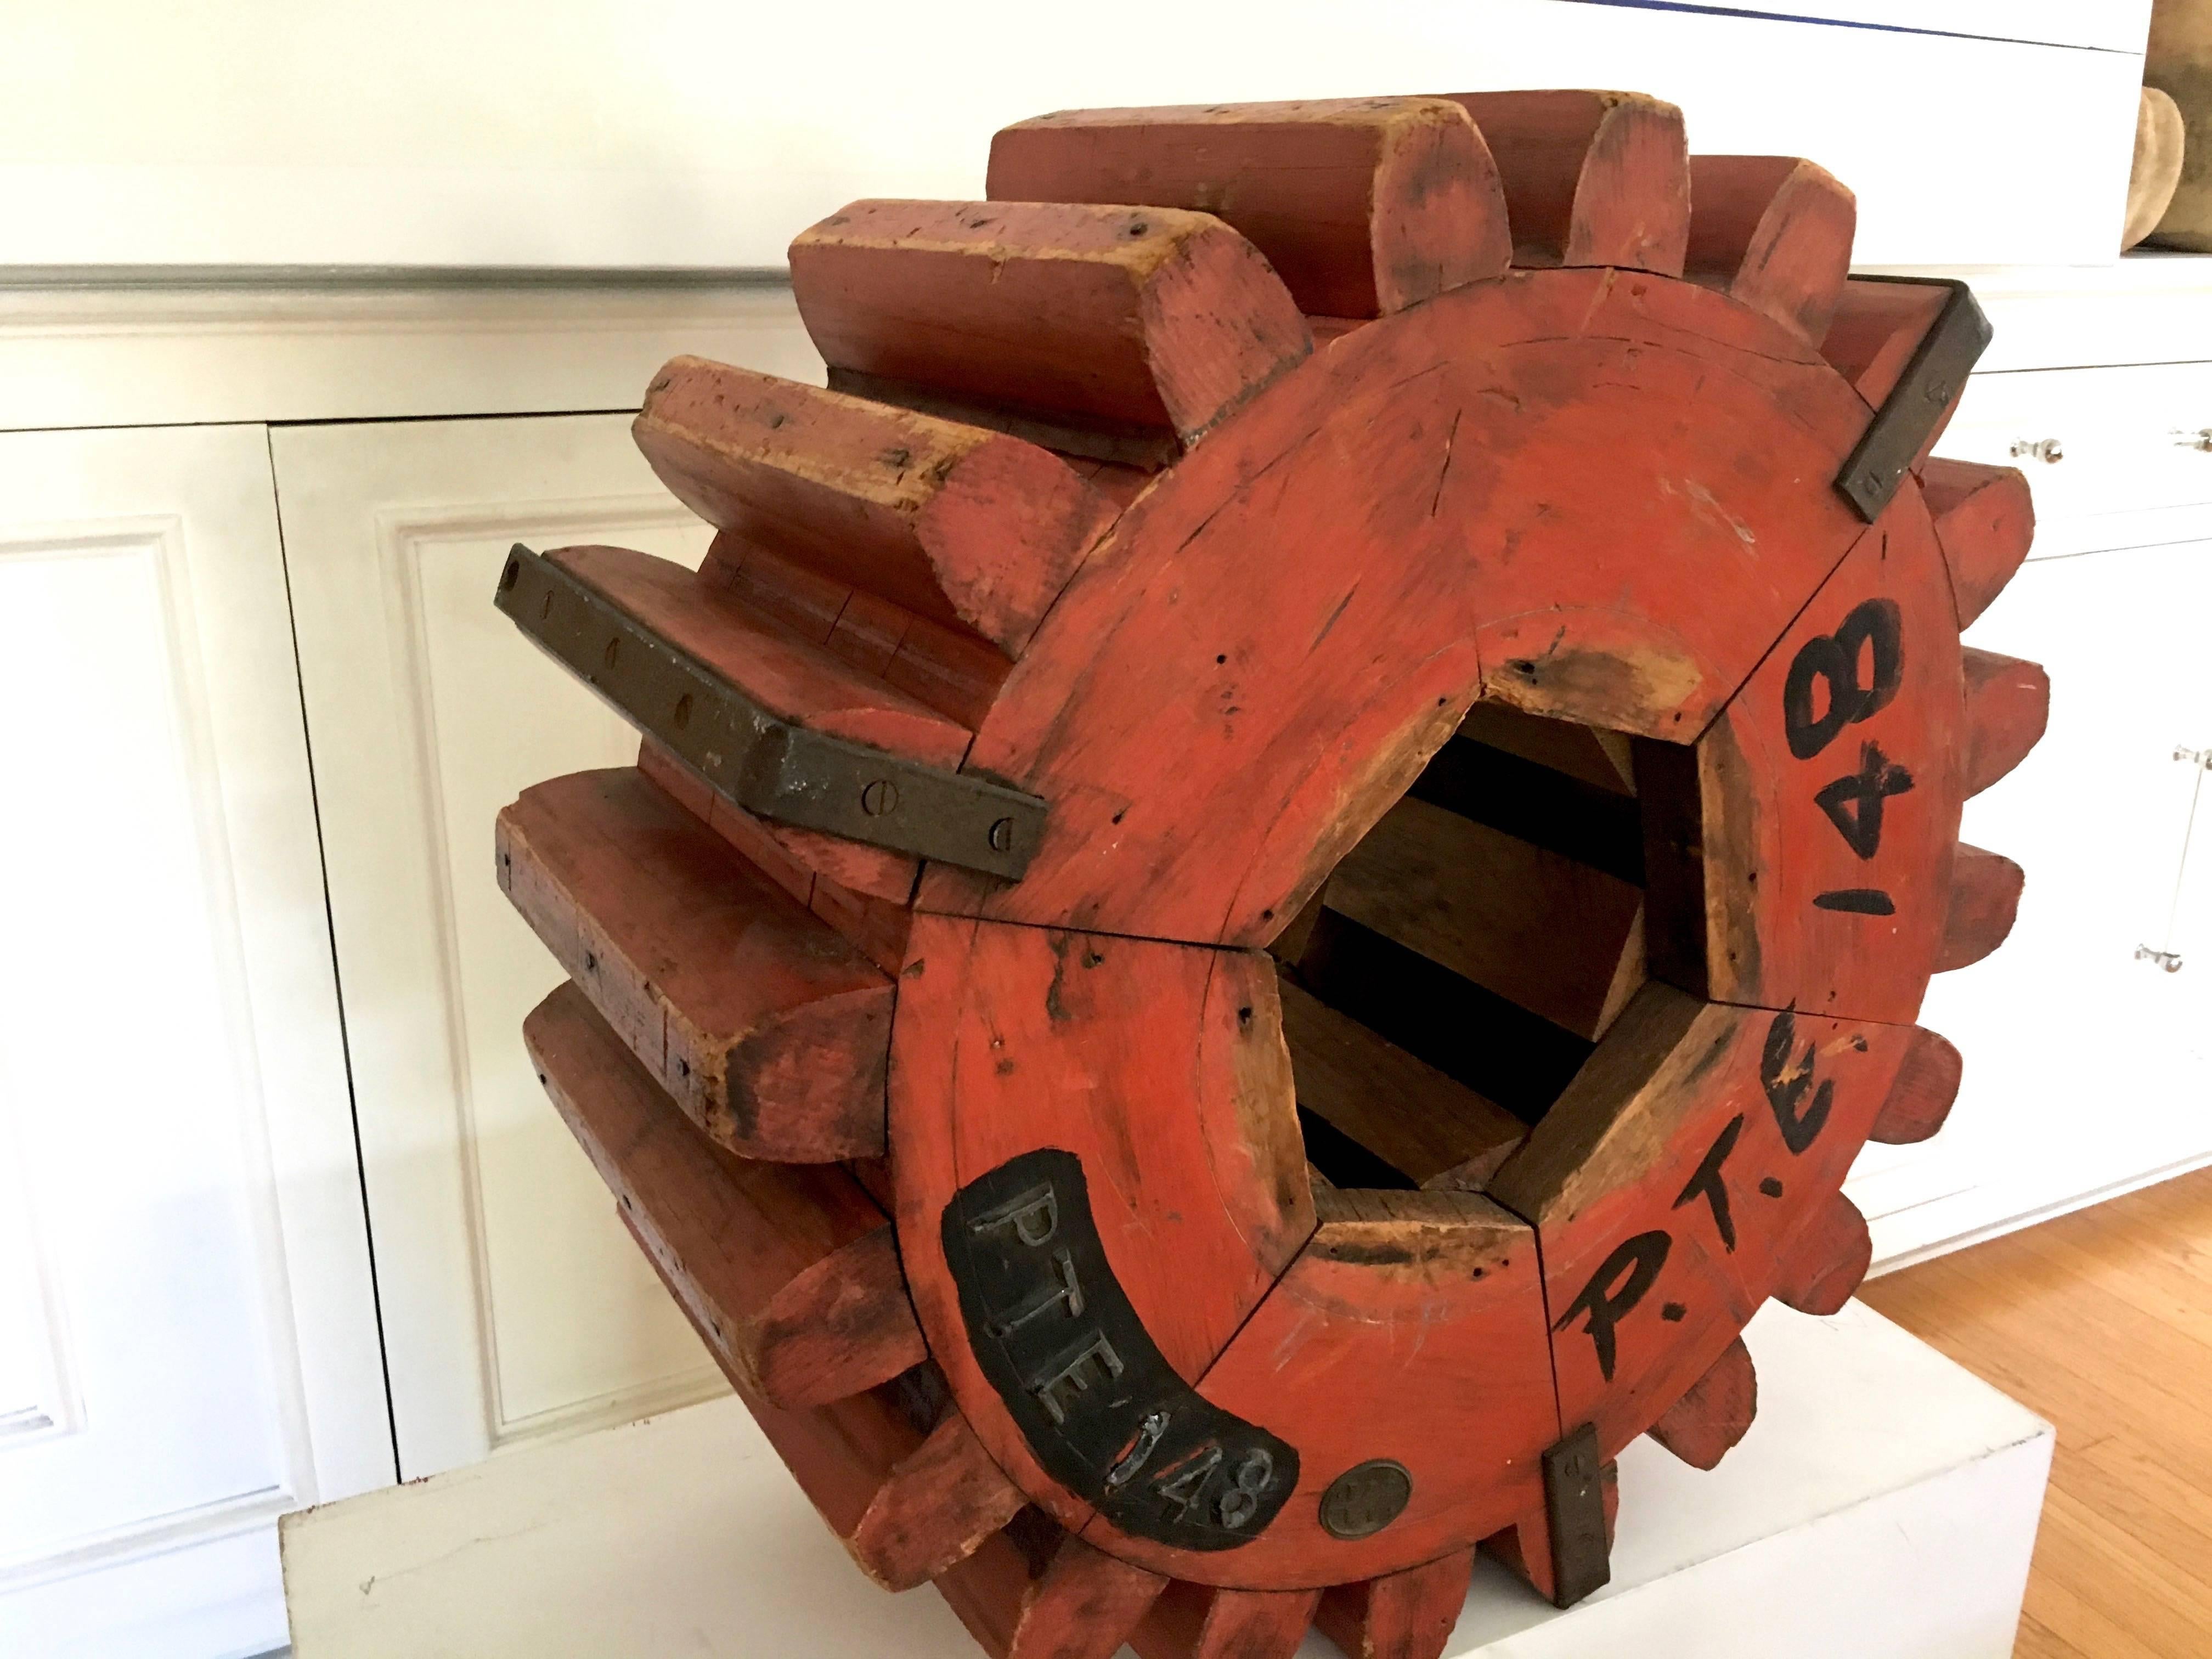 Monumental architectural Industrial wooden gear / cog mold. Imagine that this ran something very important a great decorative item on a shelf or sitting in the corner. Or add a piece of glass to make a great side or coffee table.